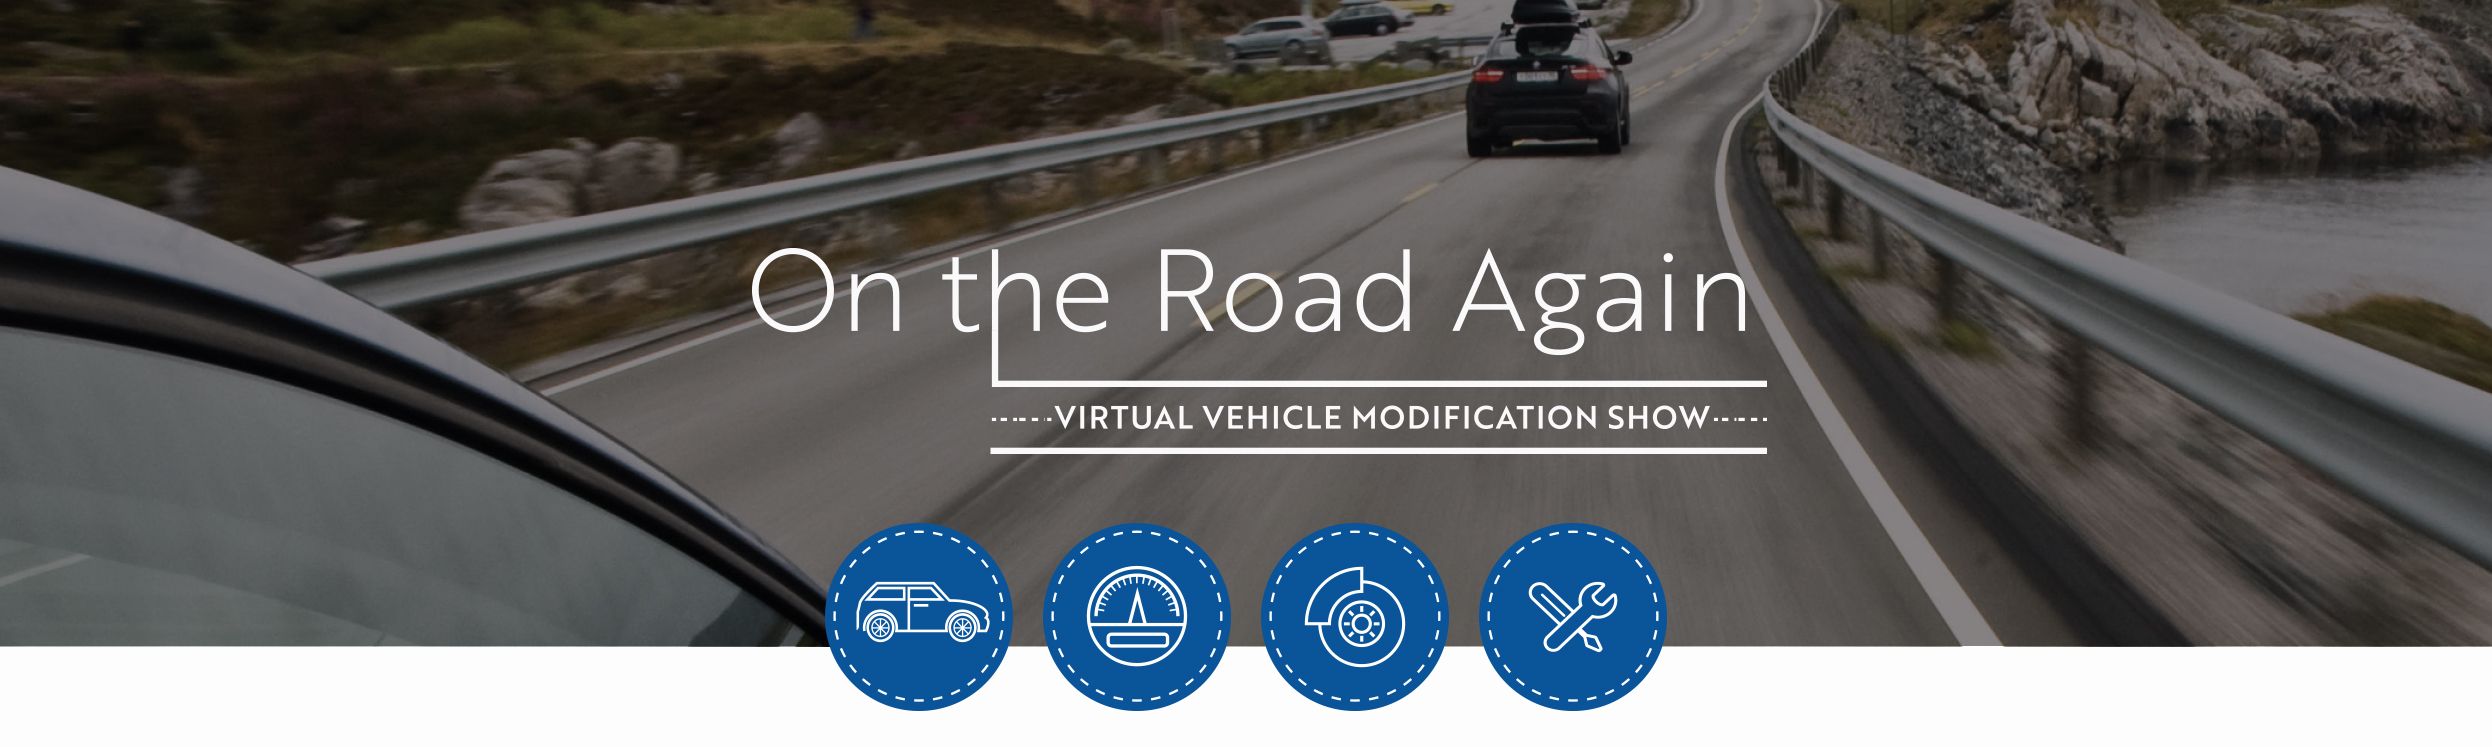 On the Road Again: Vehicle Modification Show